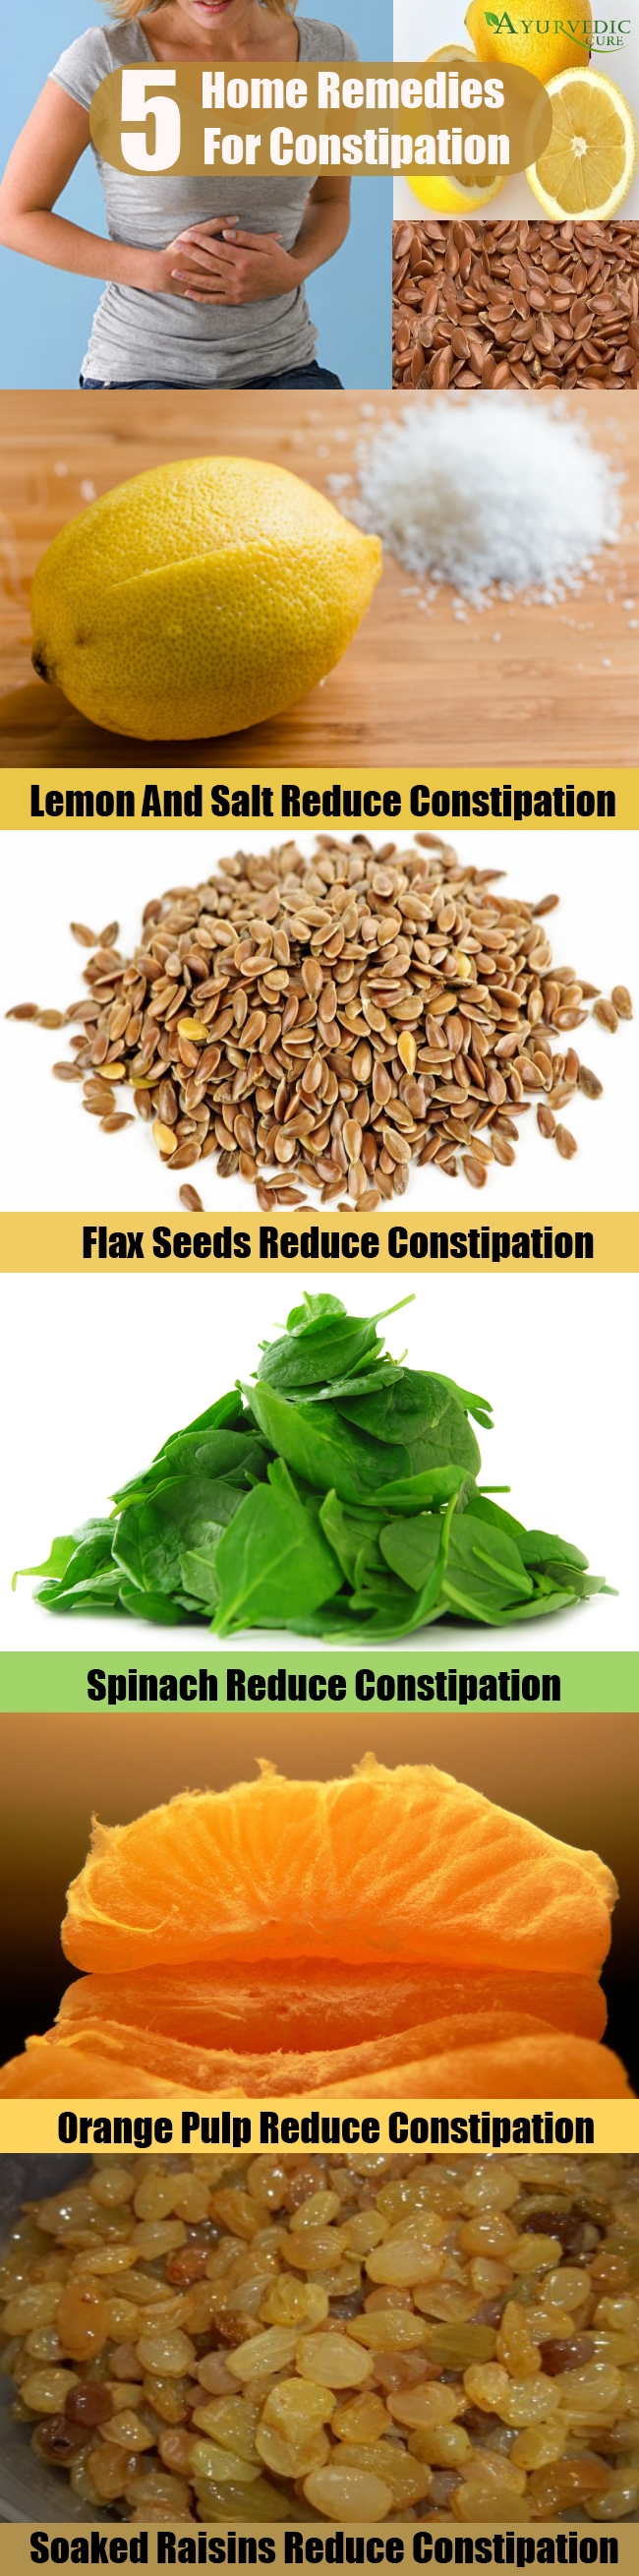 5 Easy Home Remedies For Constipation In Adults